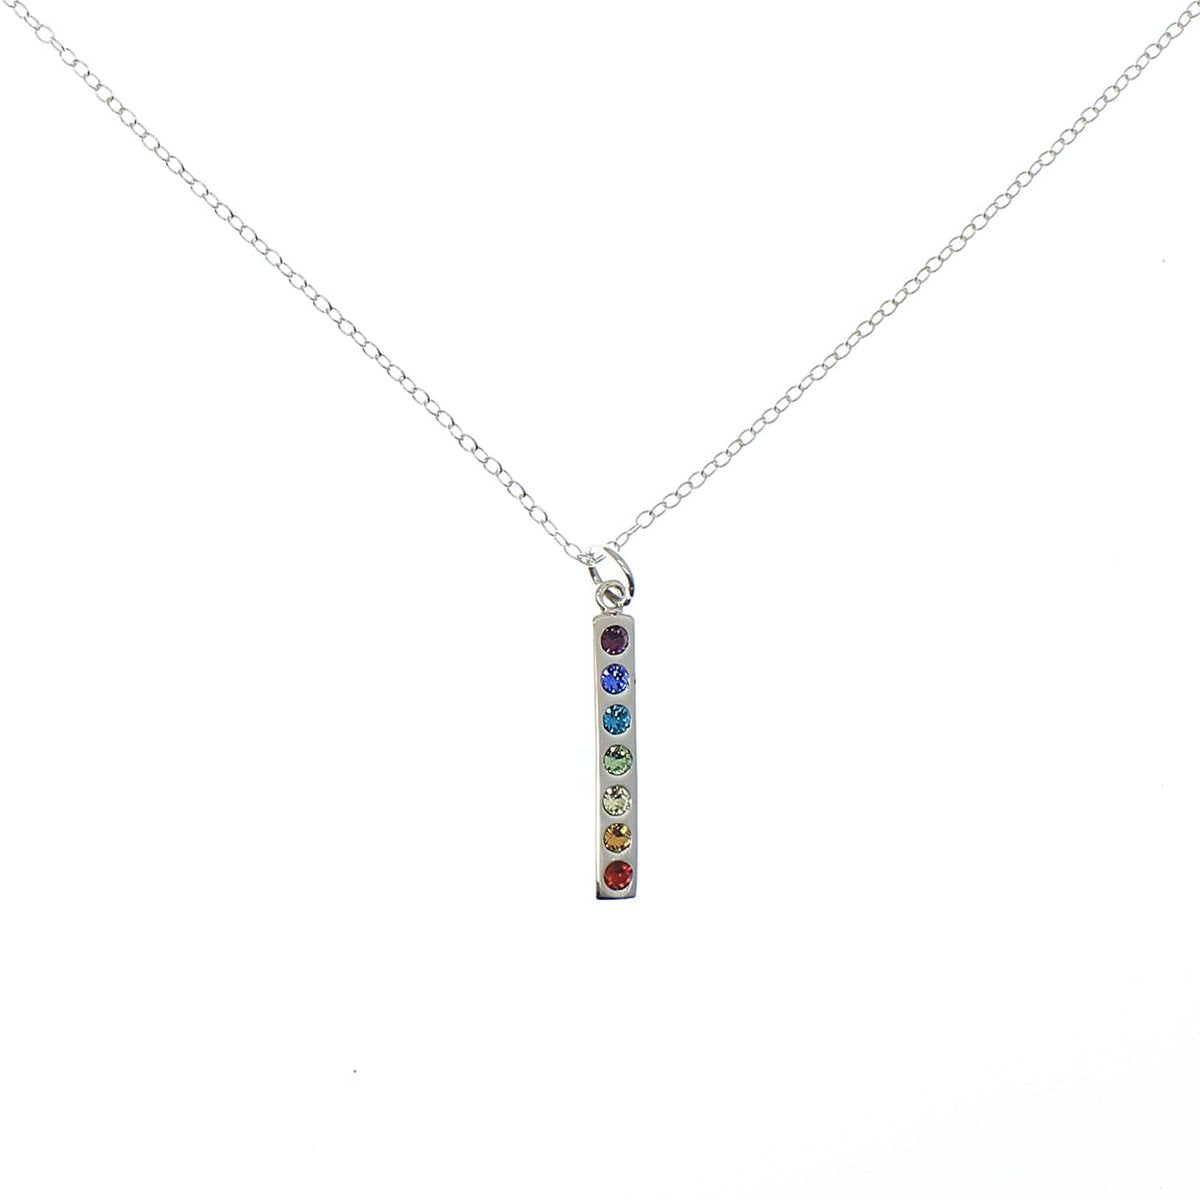 Chakra Rainbow Necklace with Crystals - Love It Personalized